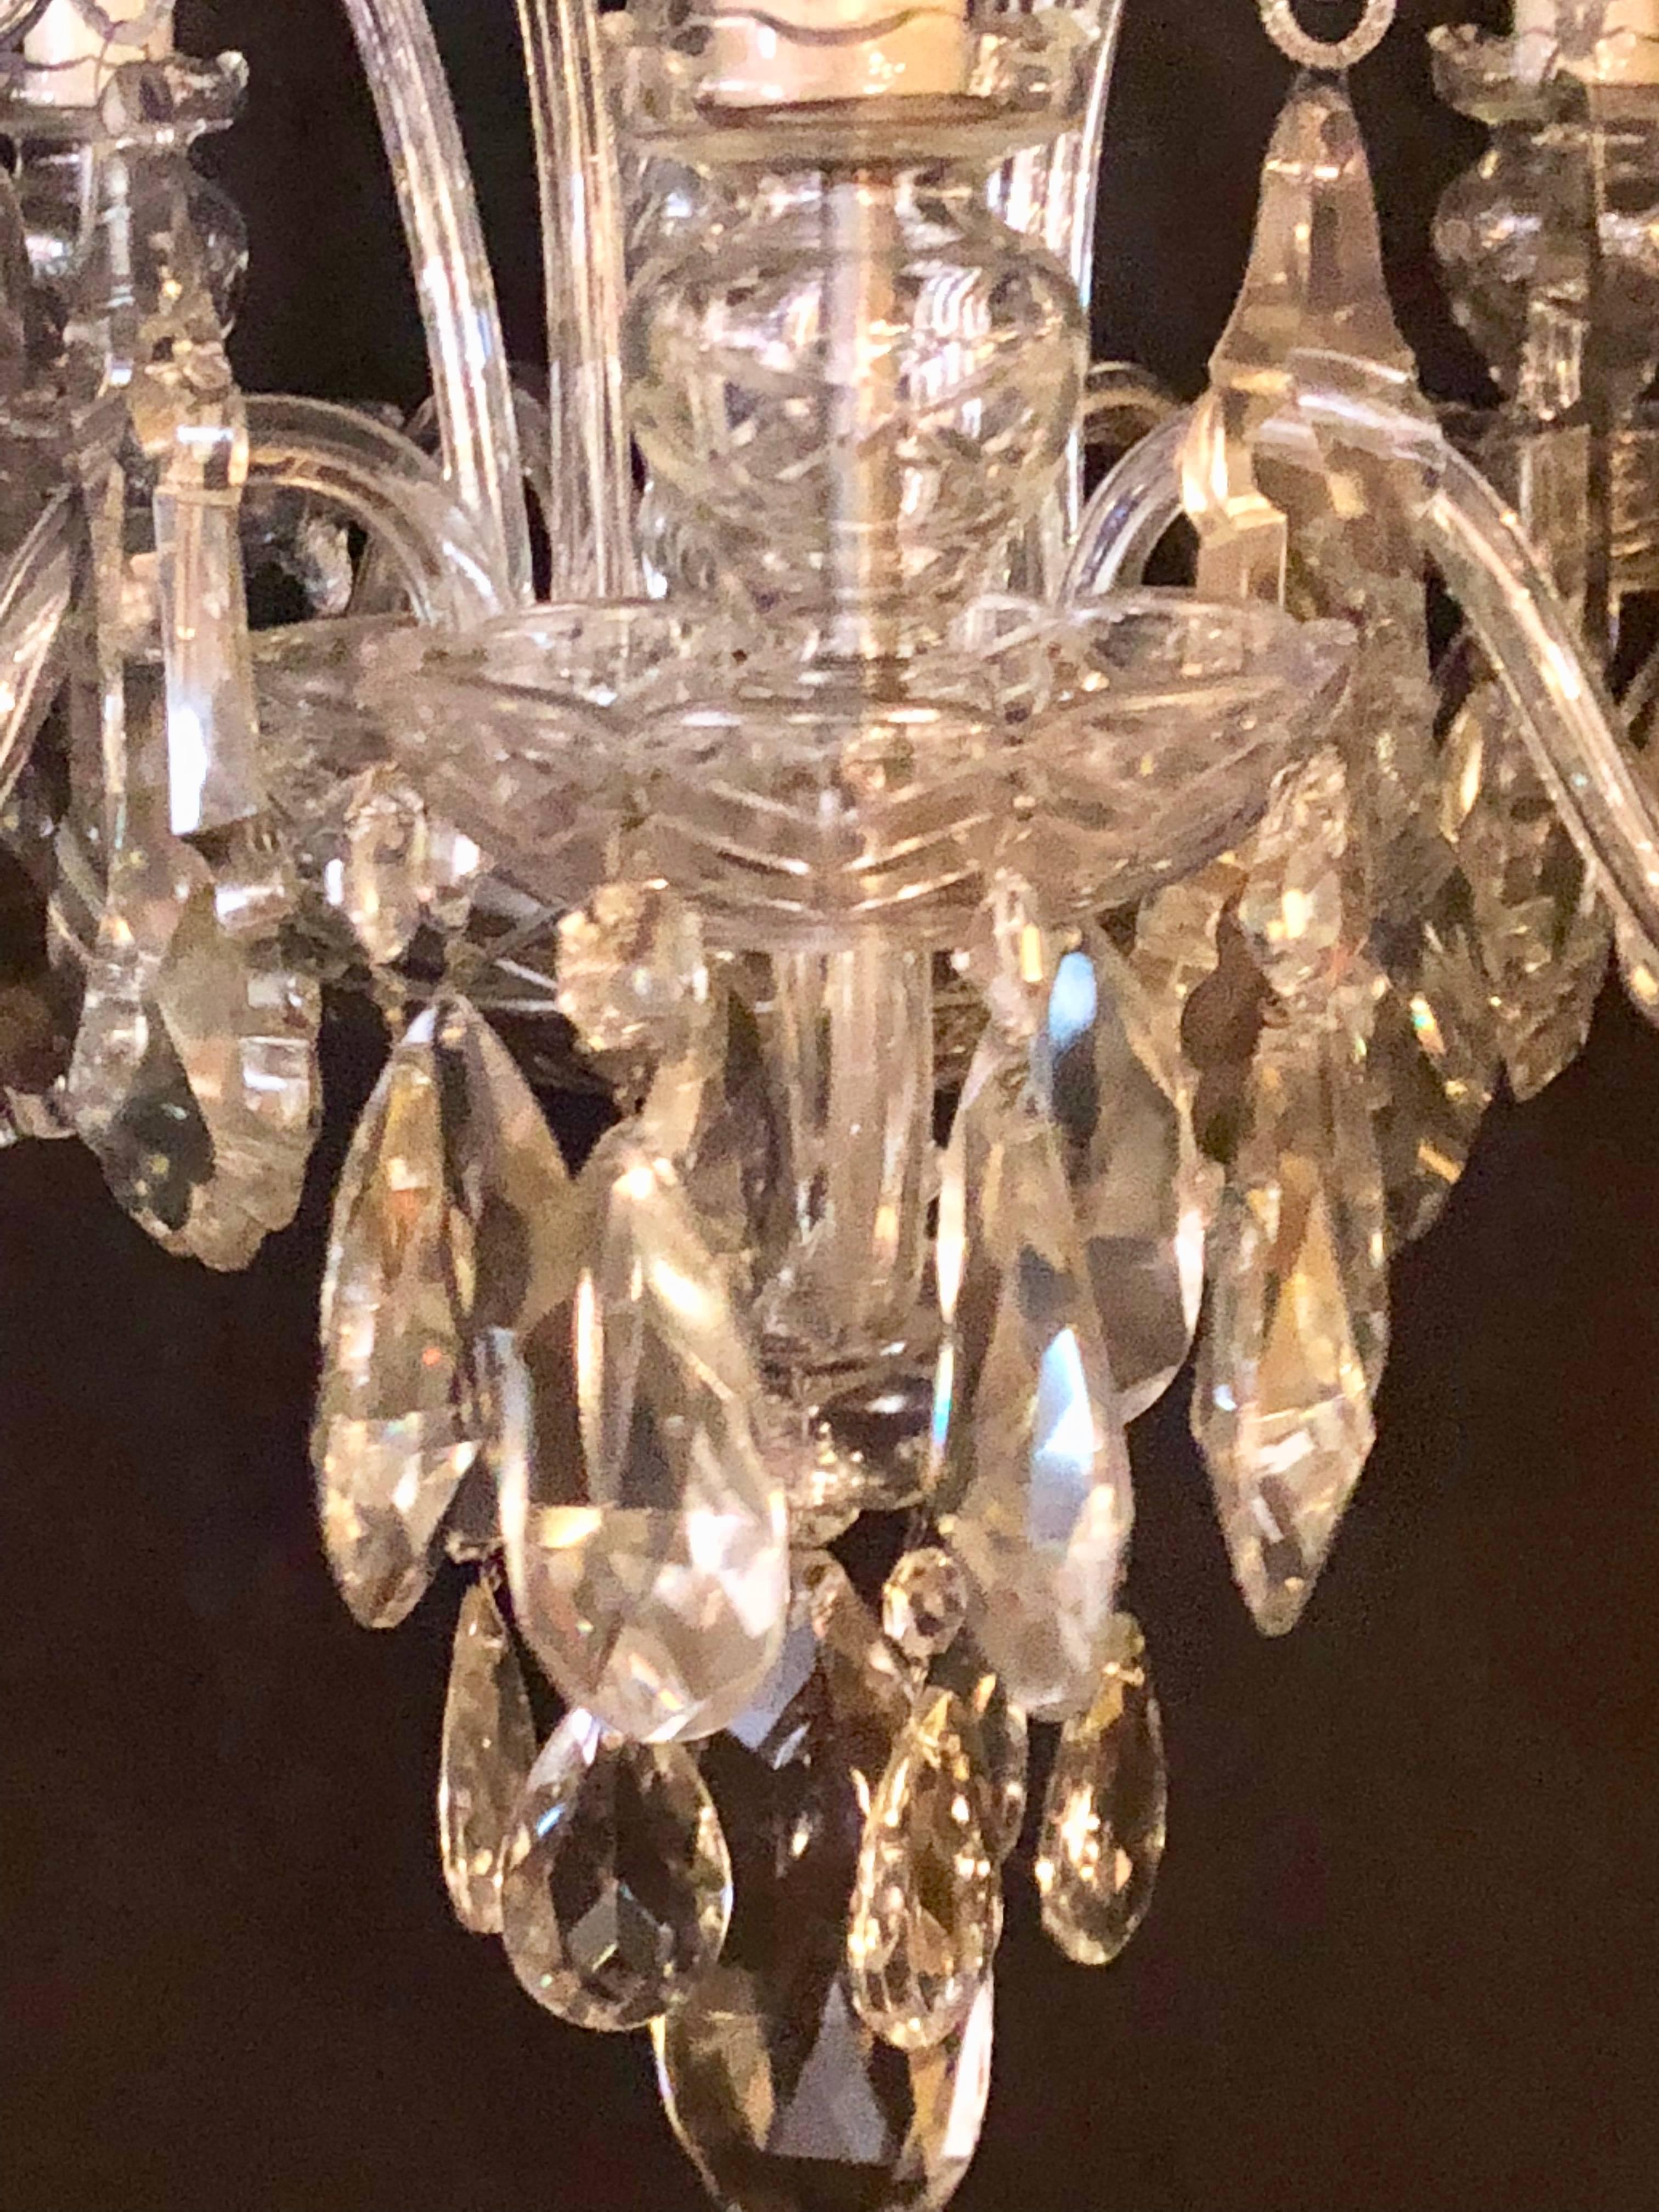 Fine cut crystal Georgian chandelier with large pendants. Recently repaired. The centre cut-glass column having five lighted arms with S-scroll cut-glass designs between them. The crystals of fine quality. Recently rewired. Possibly by Schonbek.